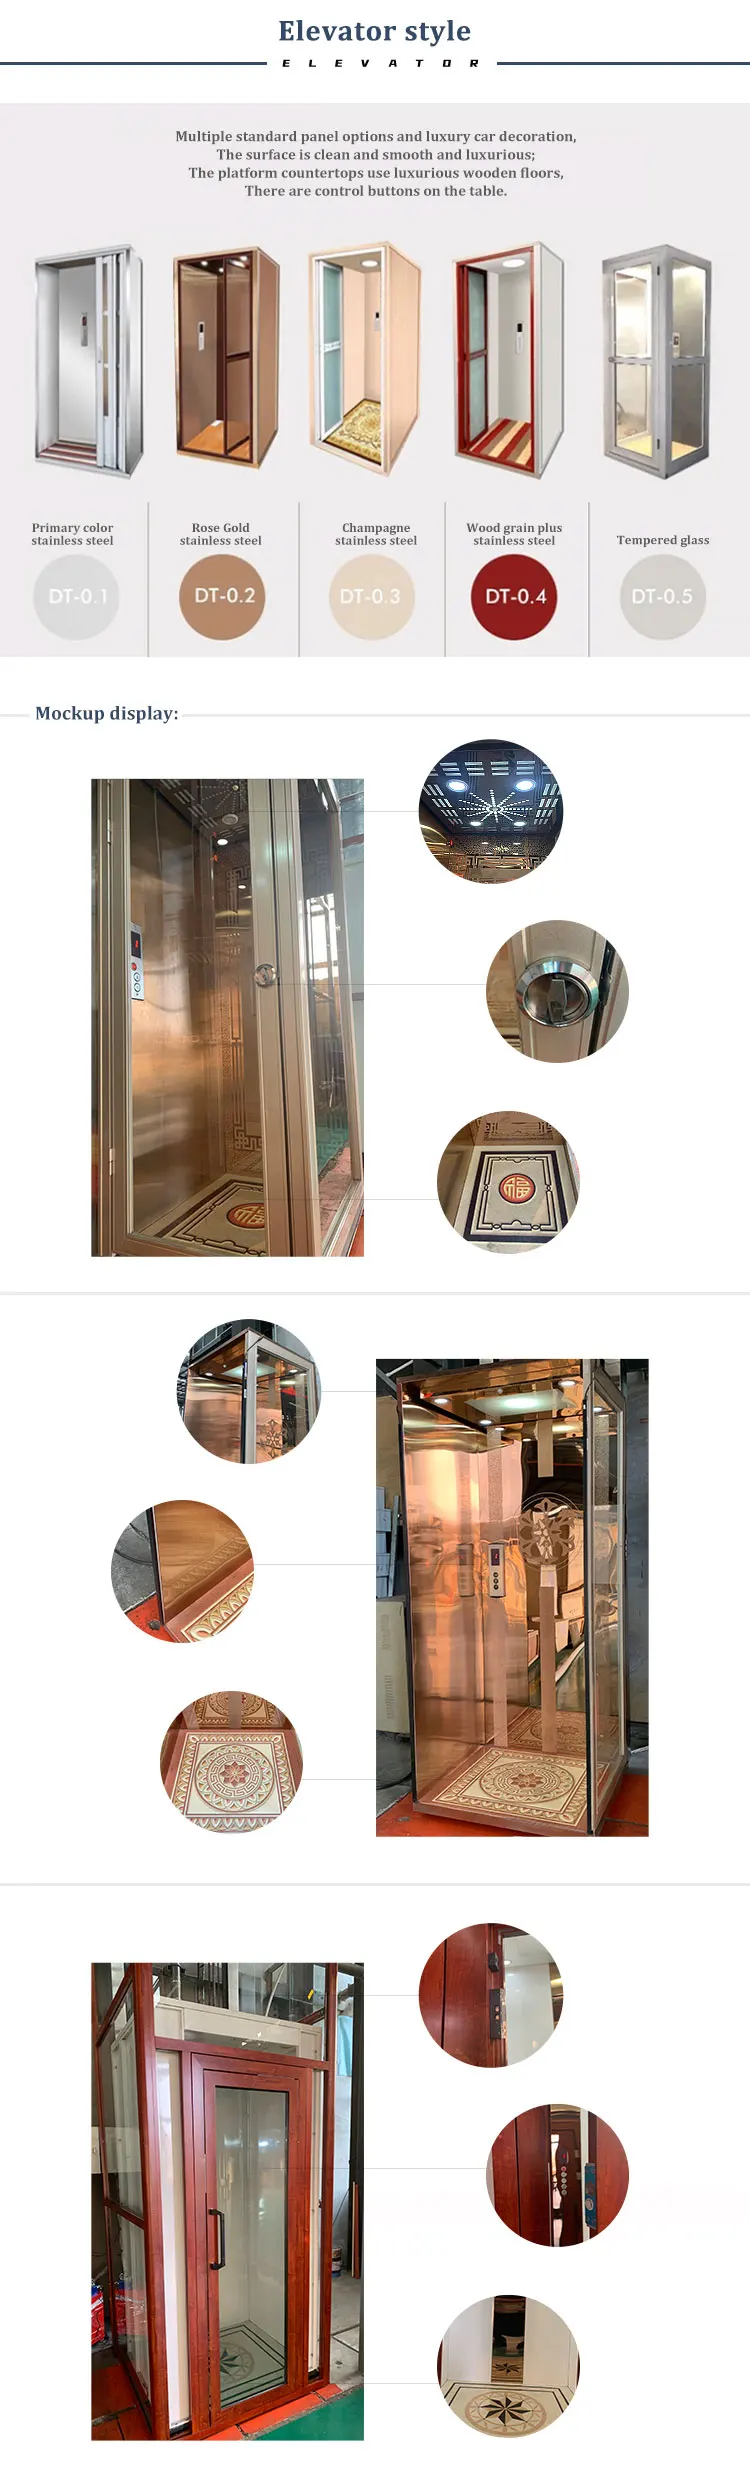 Download Wemet 200kg Home Elevator Electric Home Lifts Prices Residential Elevator Buy Home Elevators Small Elevator Lift Passenger Safe And Portable Elevator Product On Alibaba Com